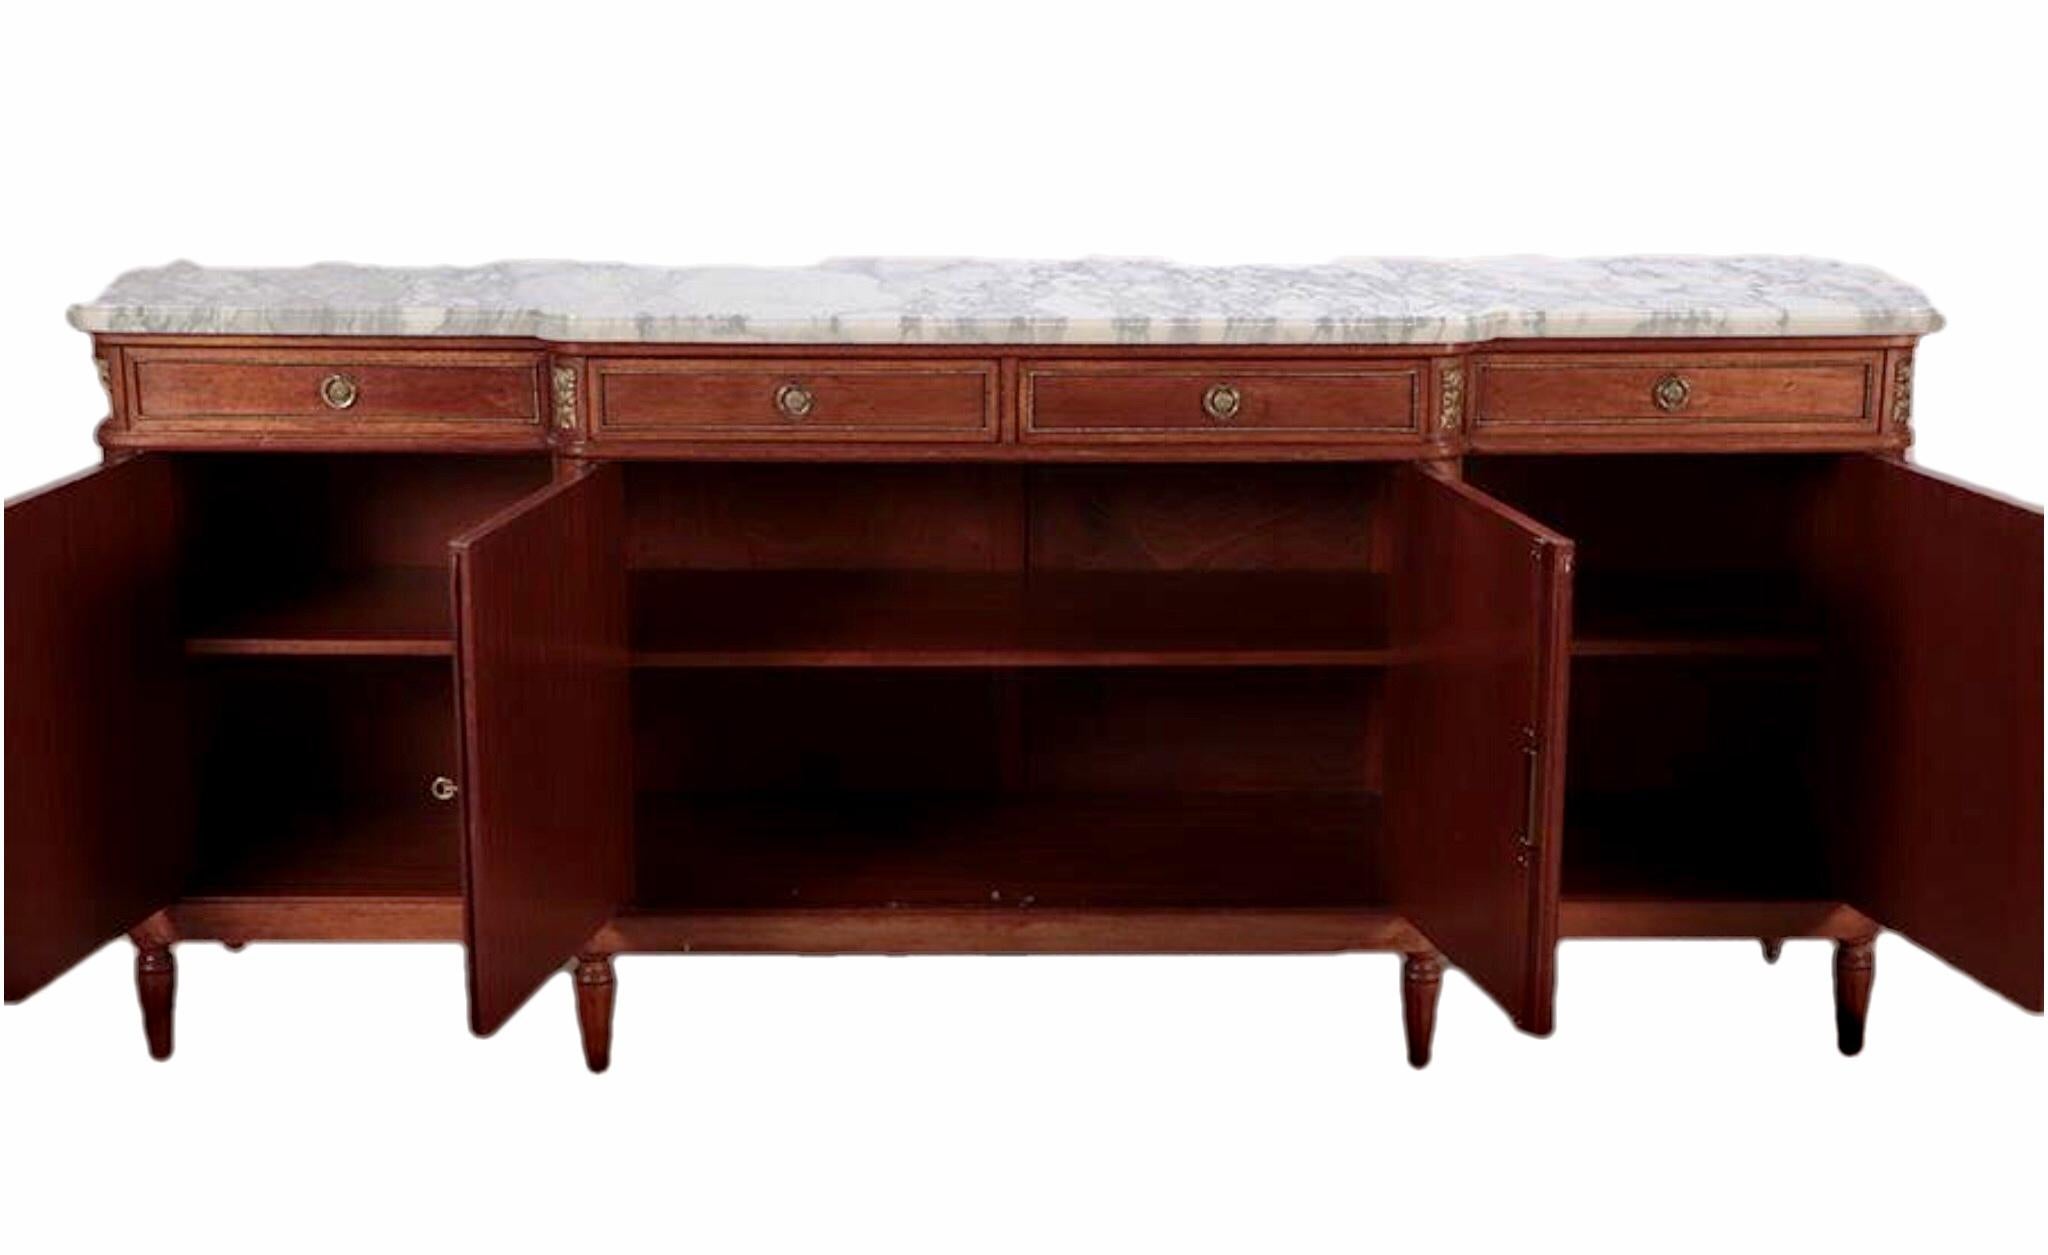 Very impressive Louis XVI style mahogany enfilade, having white Carrara marble top over four drawers and cabinets leading to interior shelf storage, featuring bronze rosette hardware and trim, rising on tapered legs ending in brass sabots. A truly